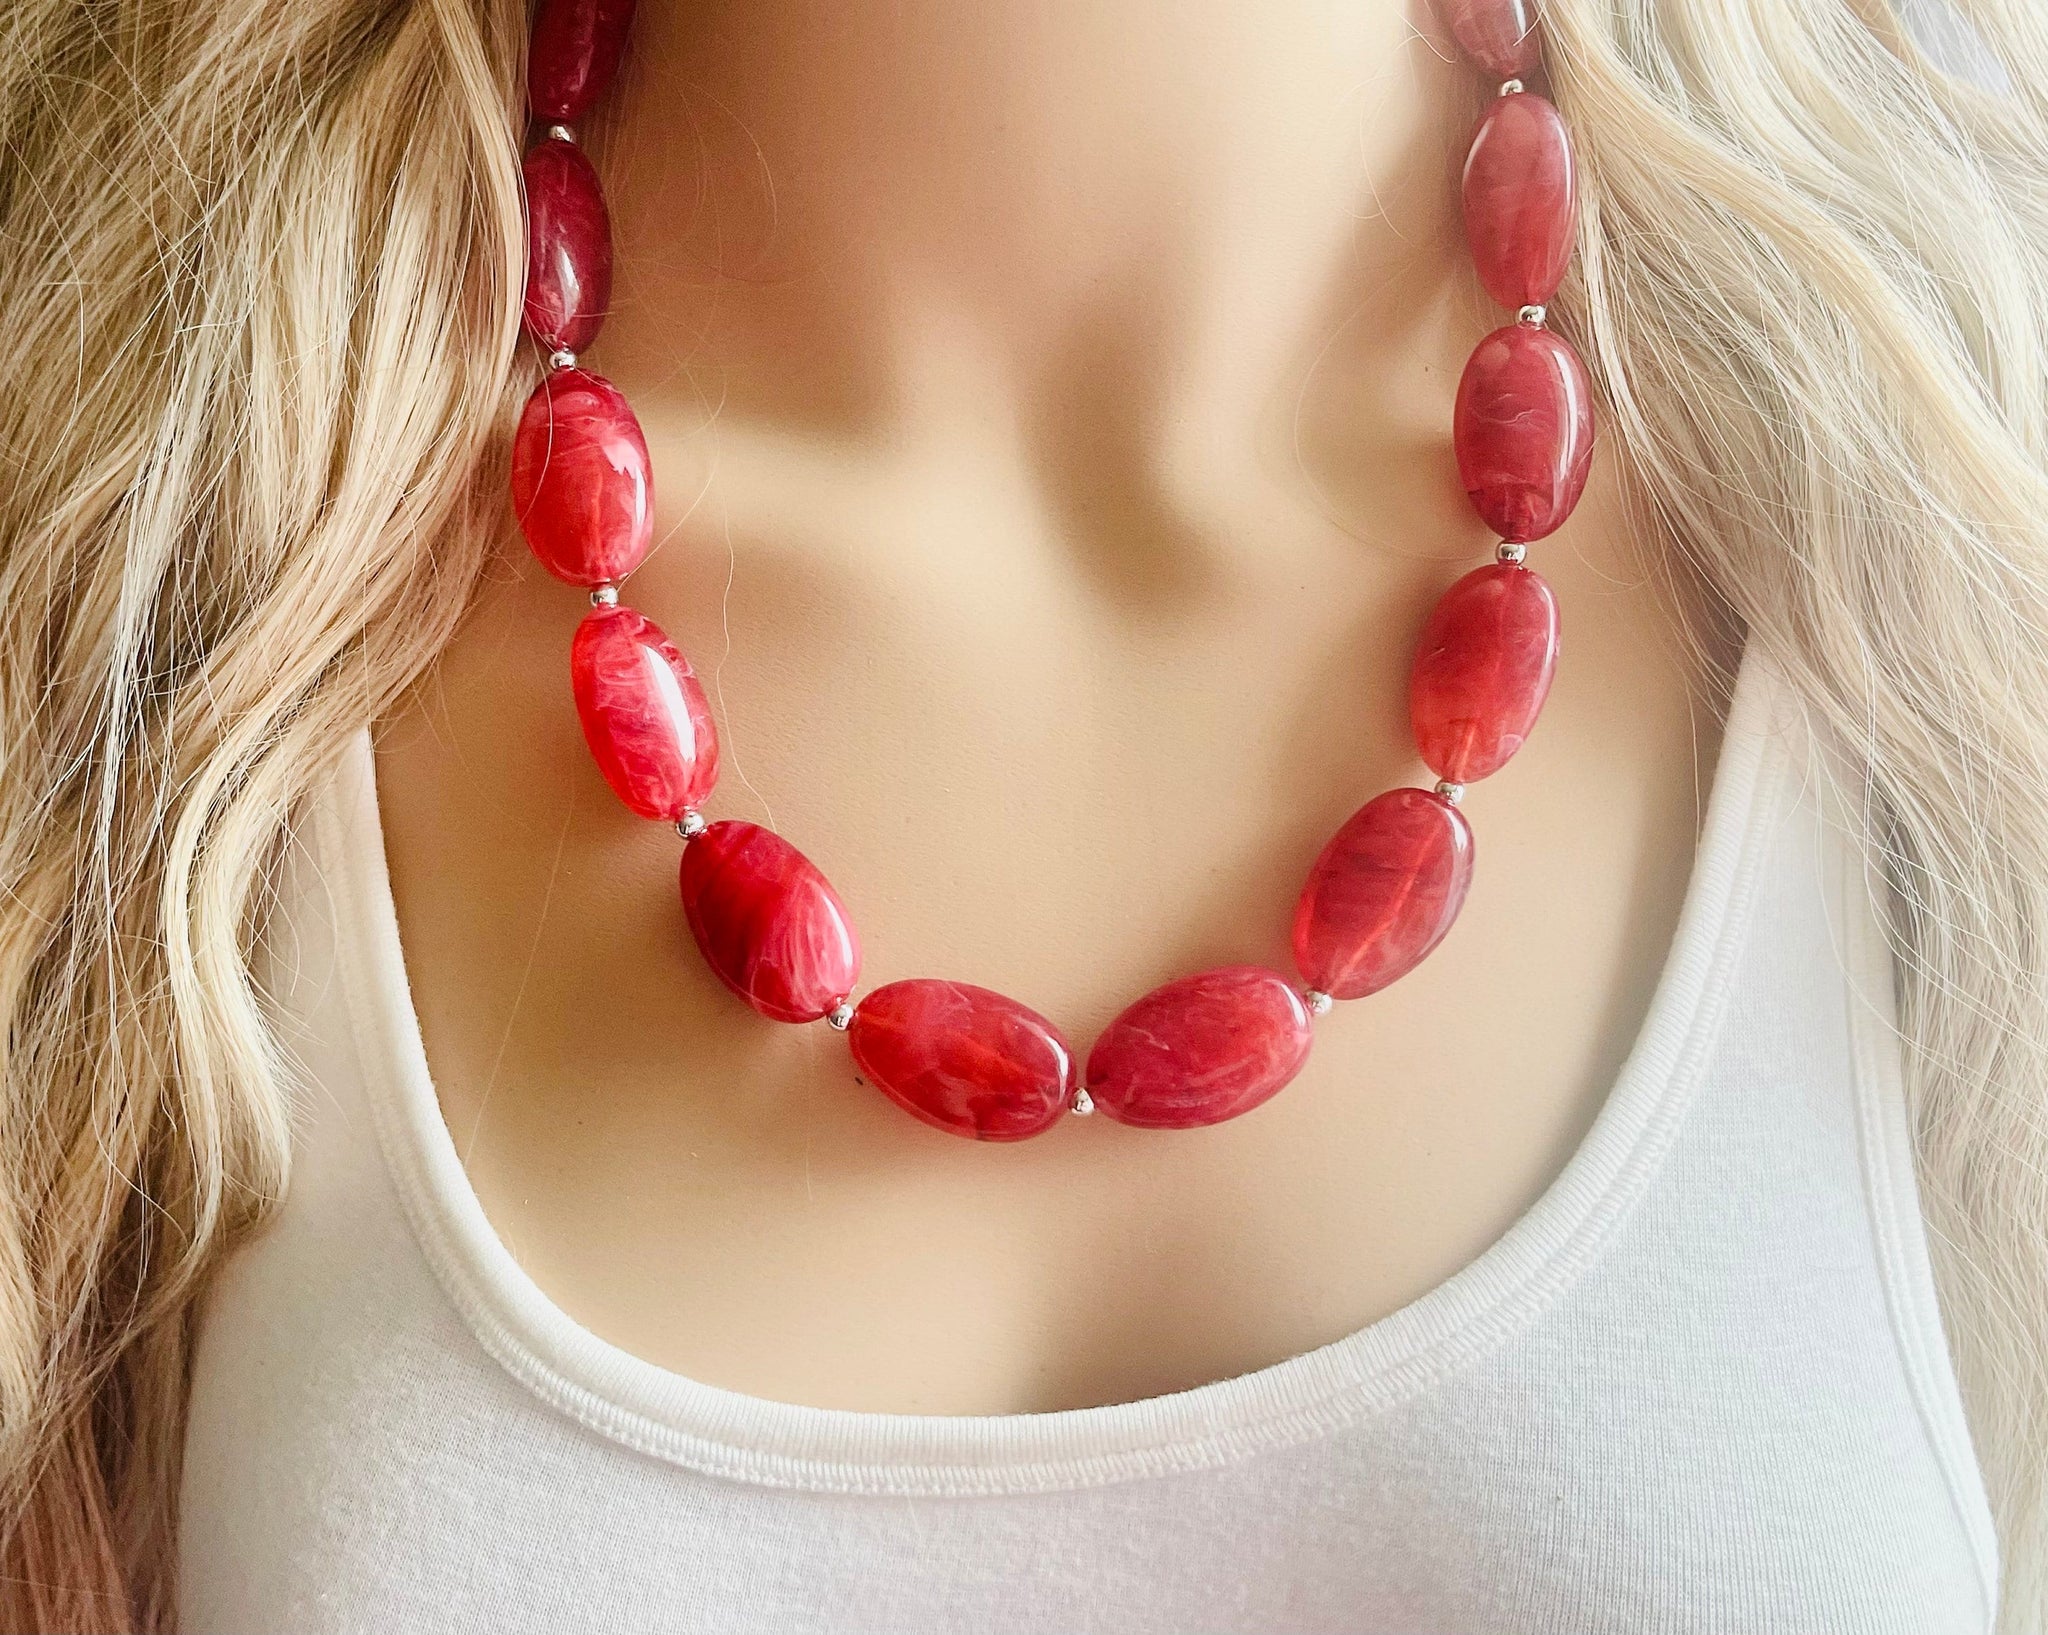 Cherry Necklace Red Cherries Jewelry Boho Necklace Red Bohemian Jewelry Statement Fruits Chunky Necklace Bib Spring Fruit Jewelry for Girls